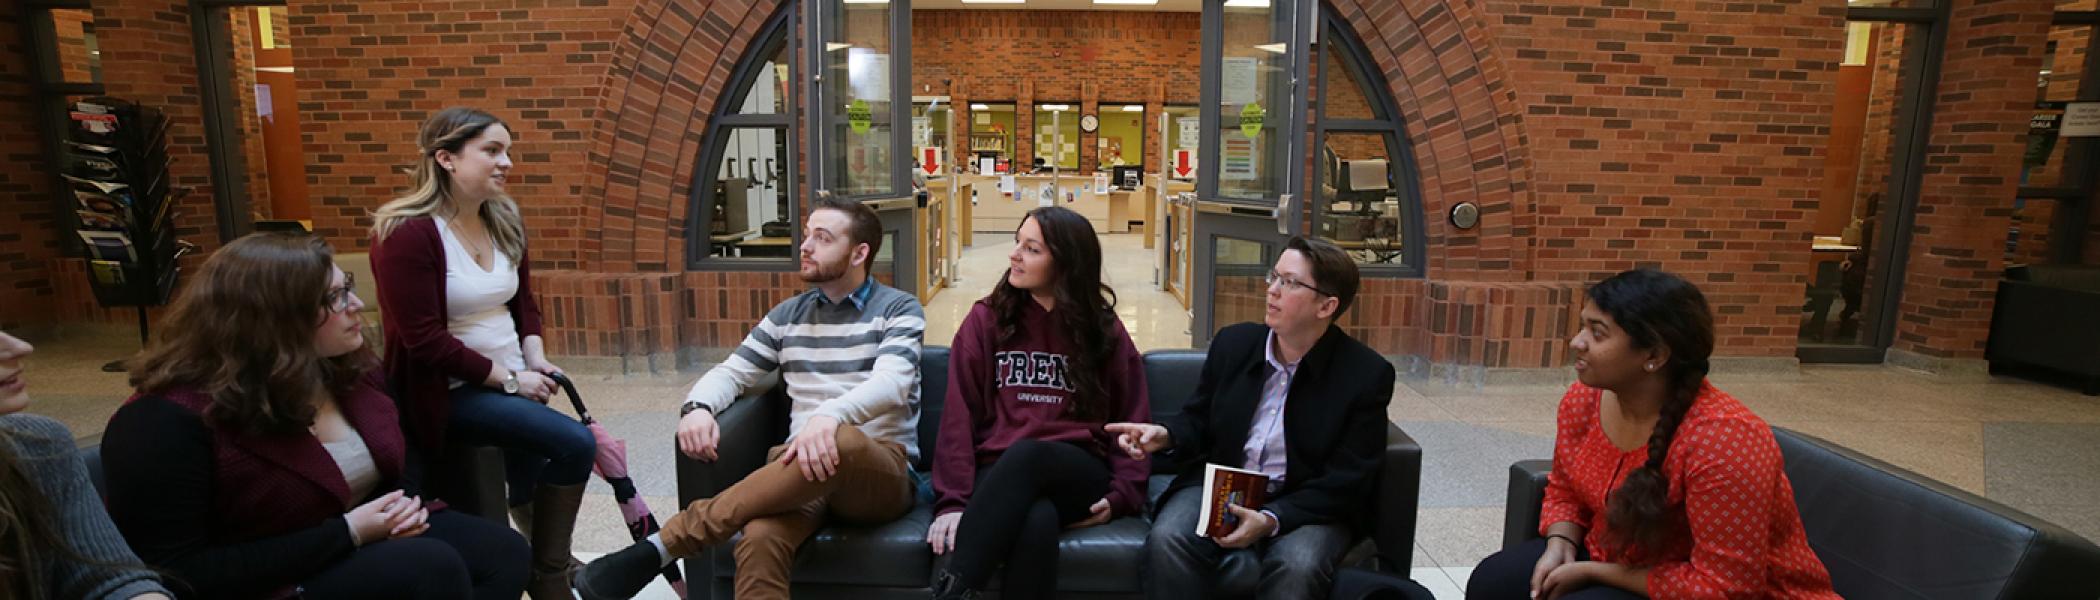 Student and teachers sitting in the common area Trent University Durham chatting 